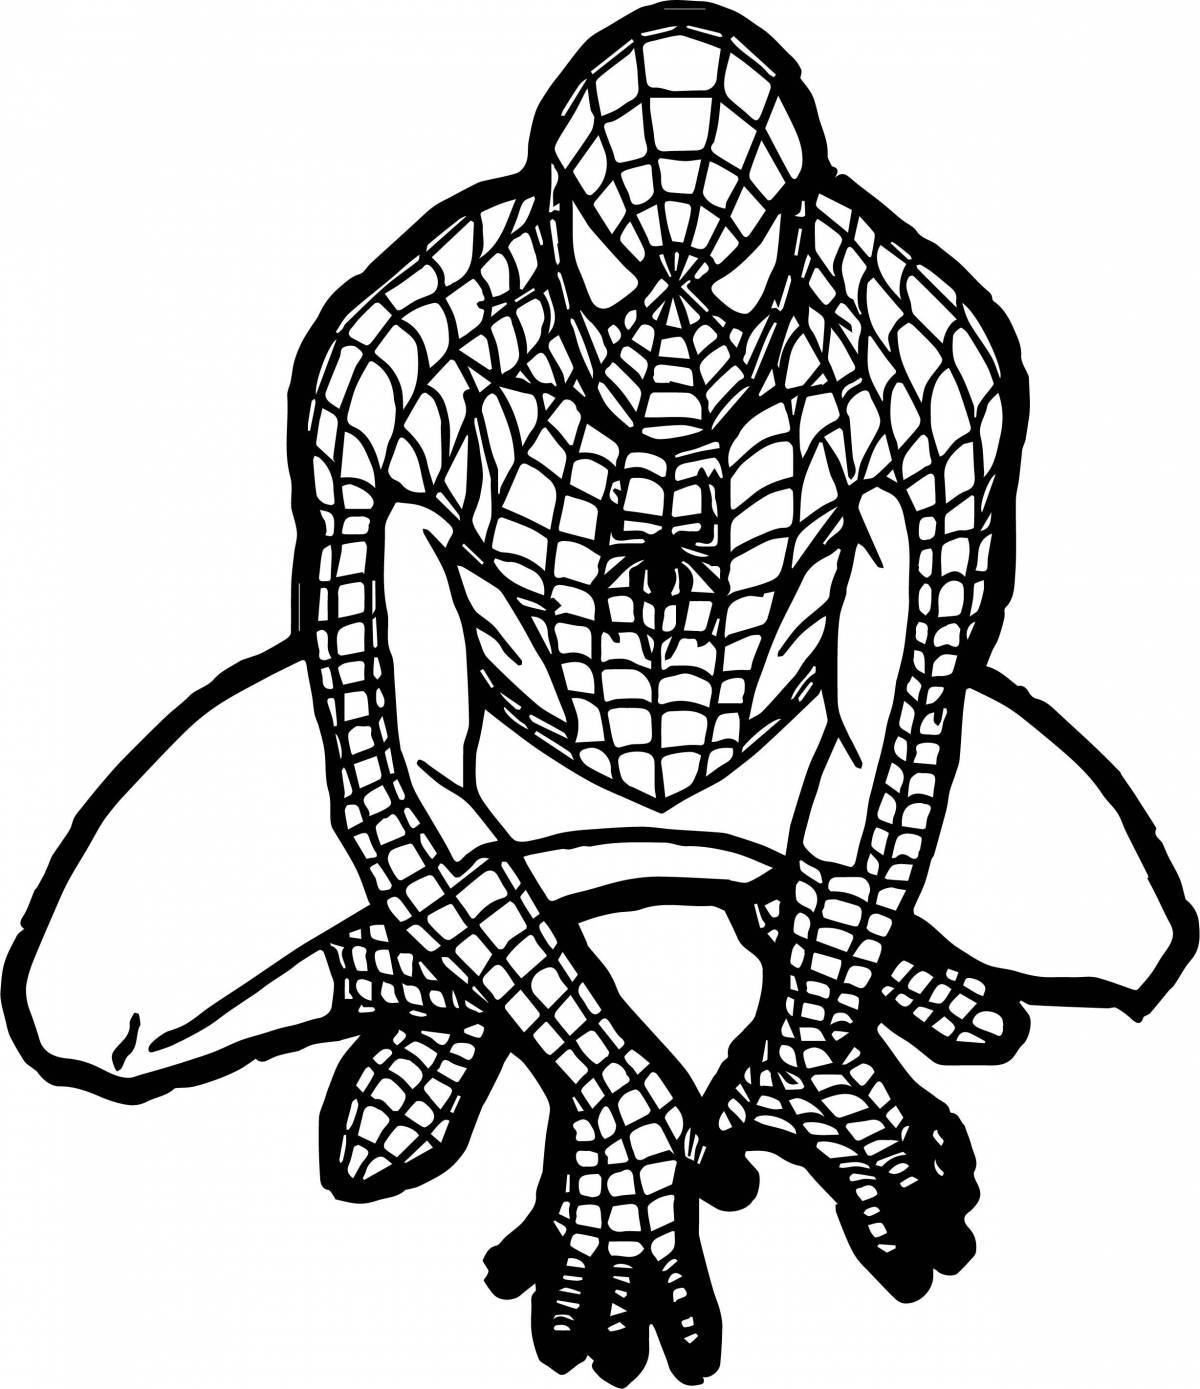 Rampant Spider-Man coloring pages for boys